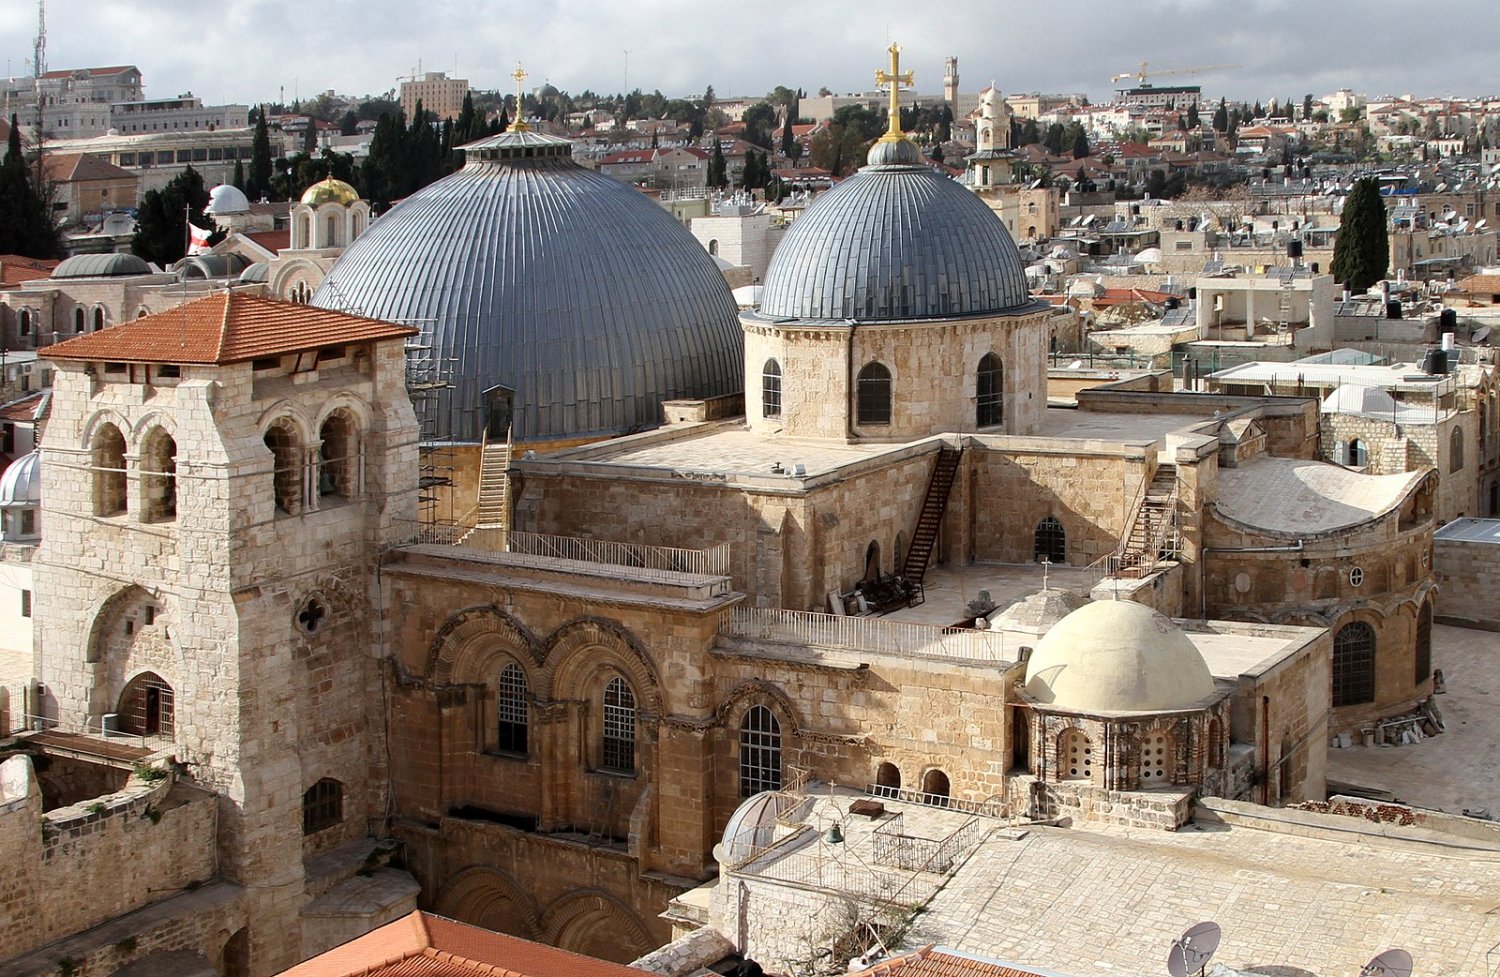 The Holy Sepulchre in the Old City of Jerusalem, March 3, 2010